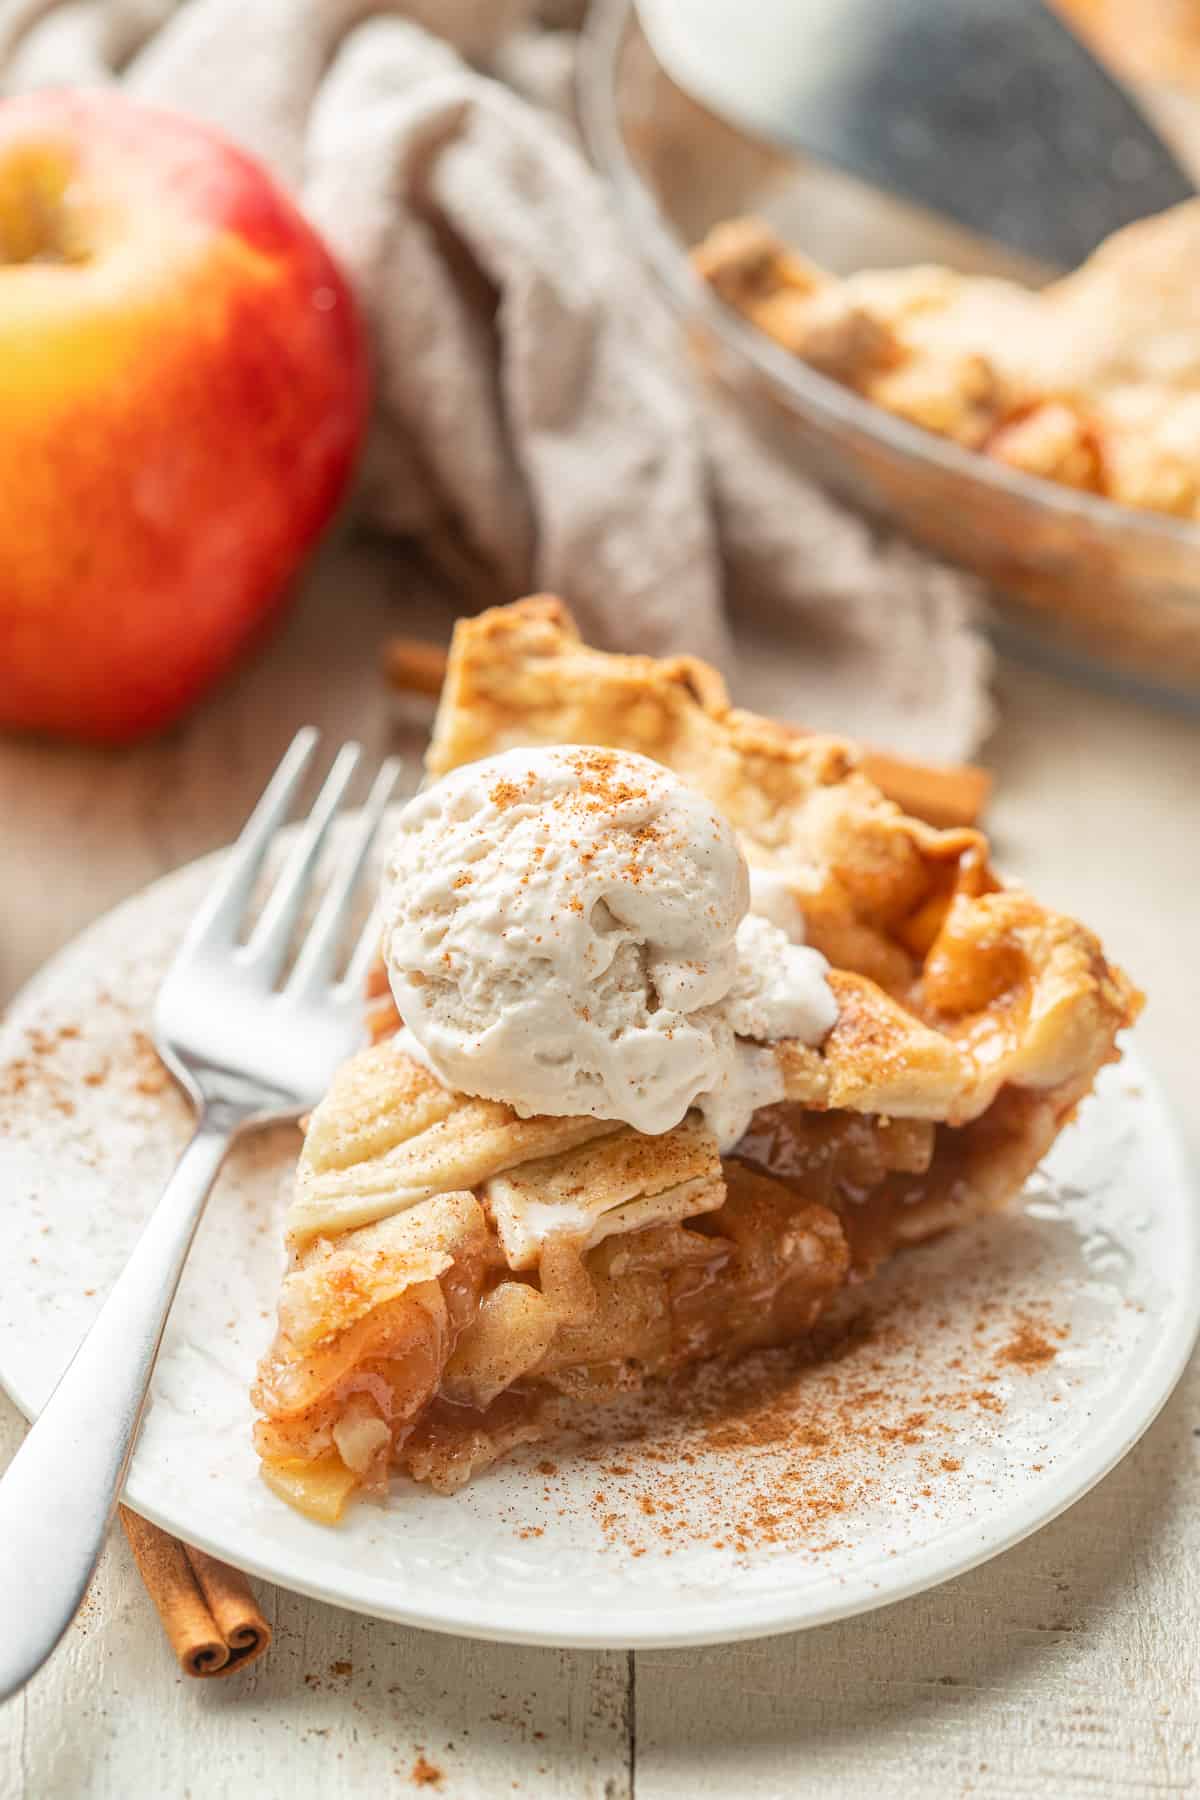 Slice of Vegan Apple Pie with apple and pie dish in the background.